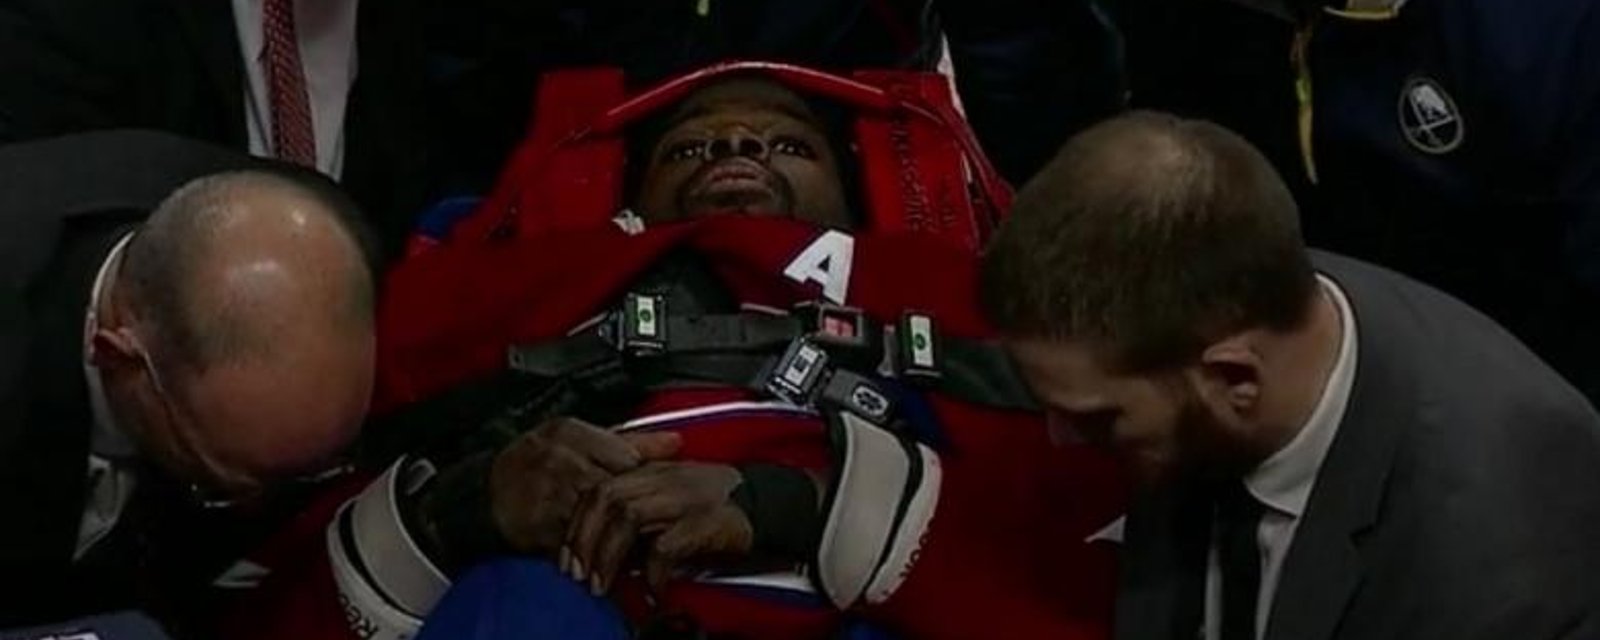 Breaking: P.K. Subban has been carried off the ice on a stretcher.